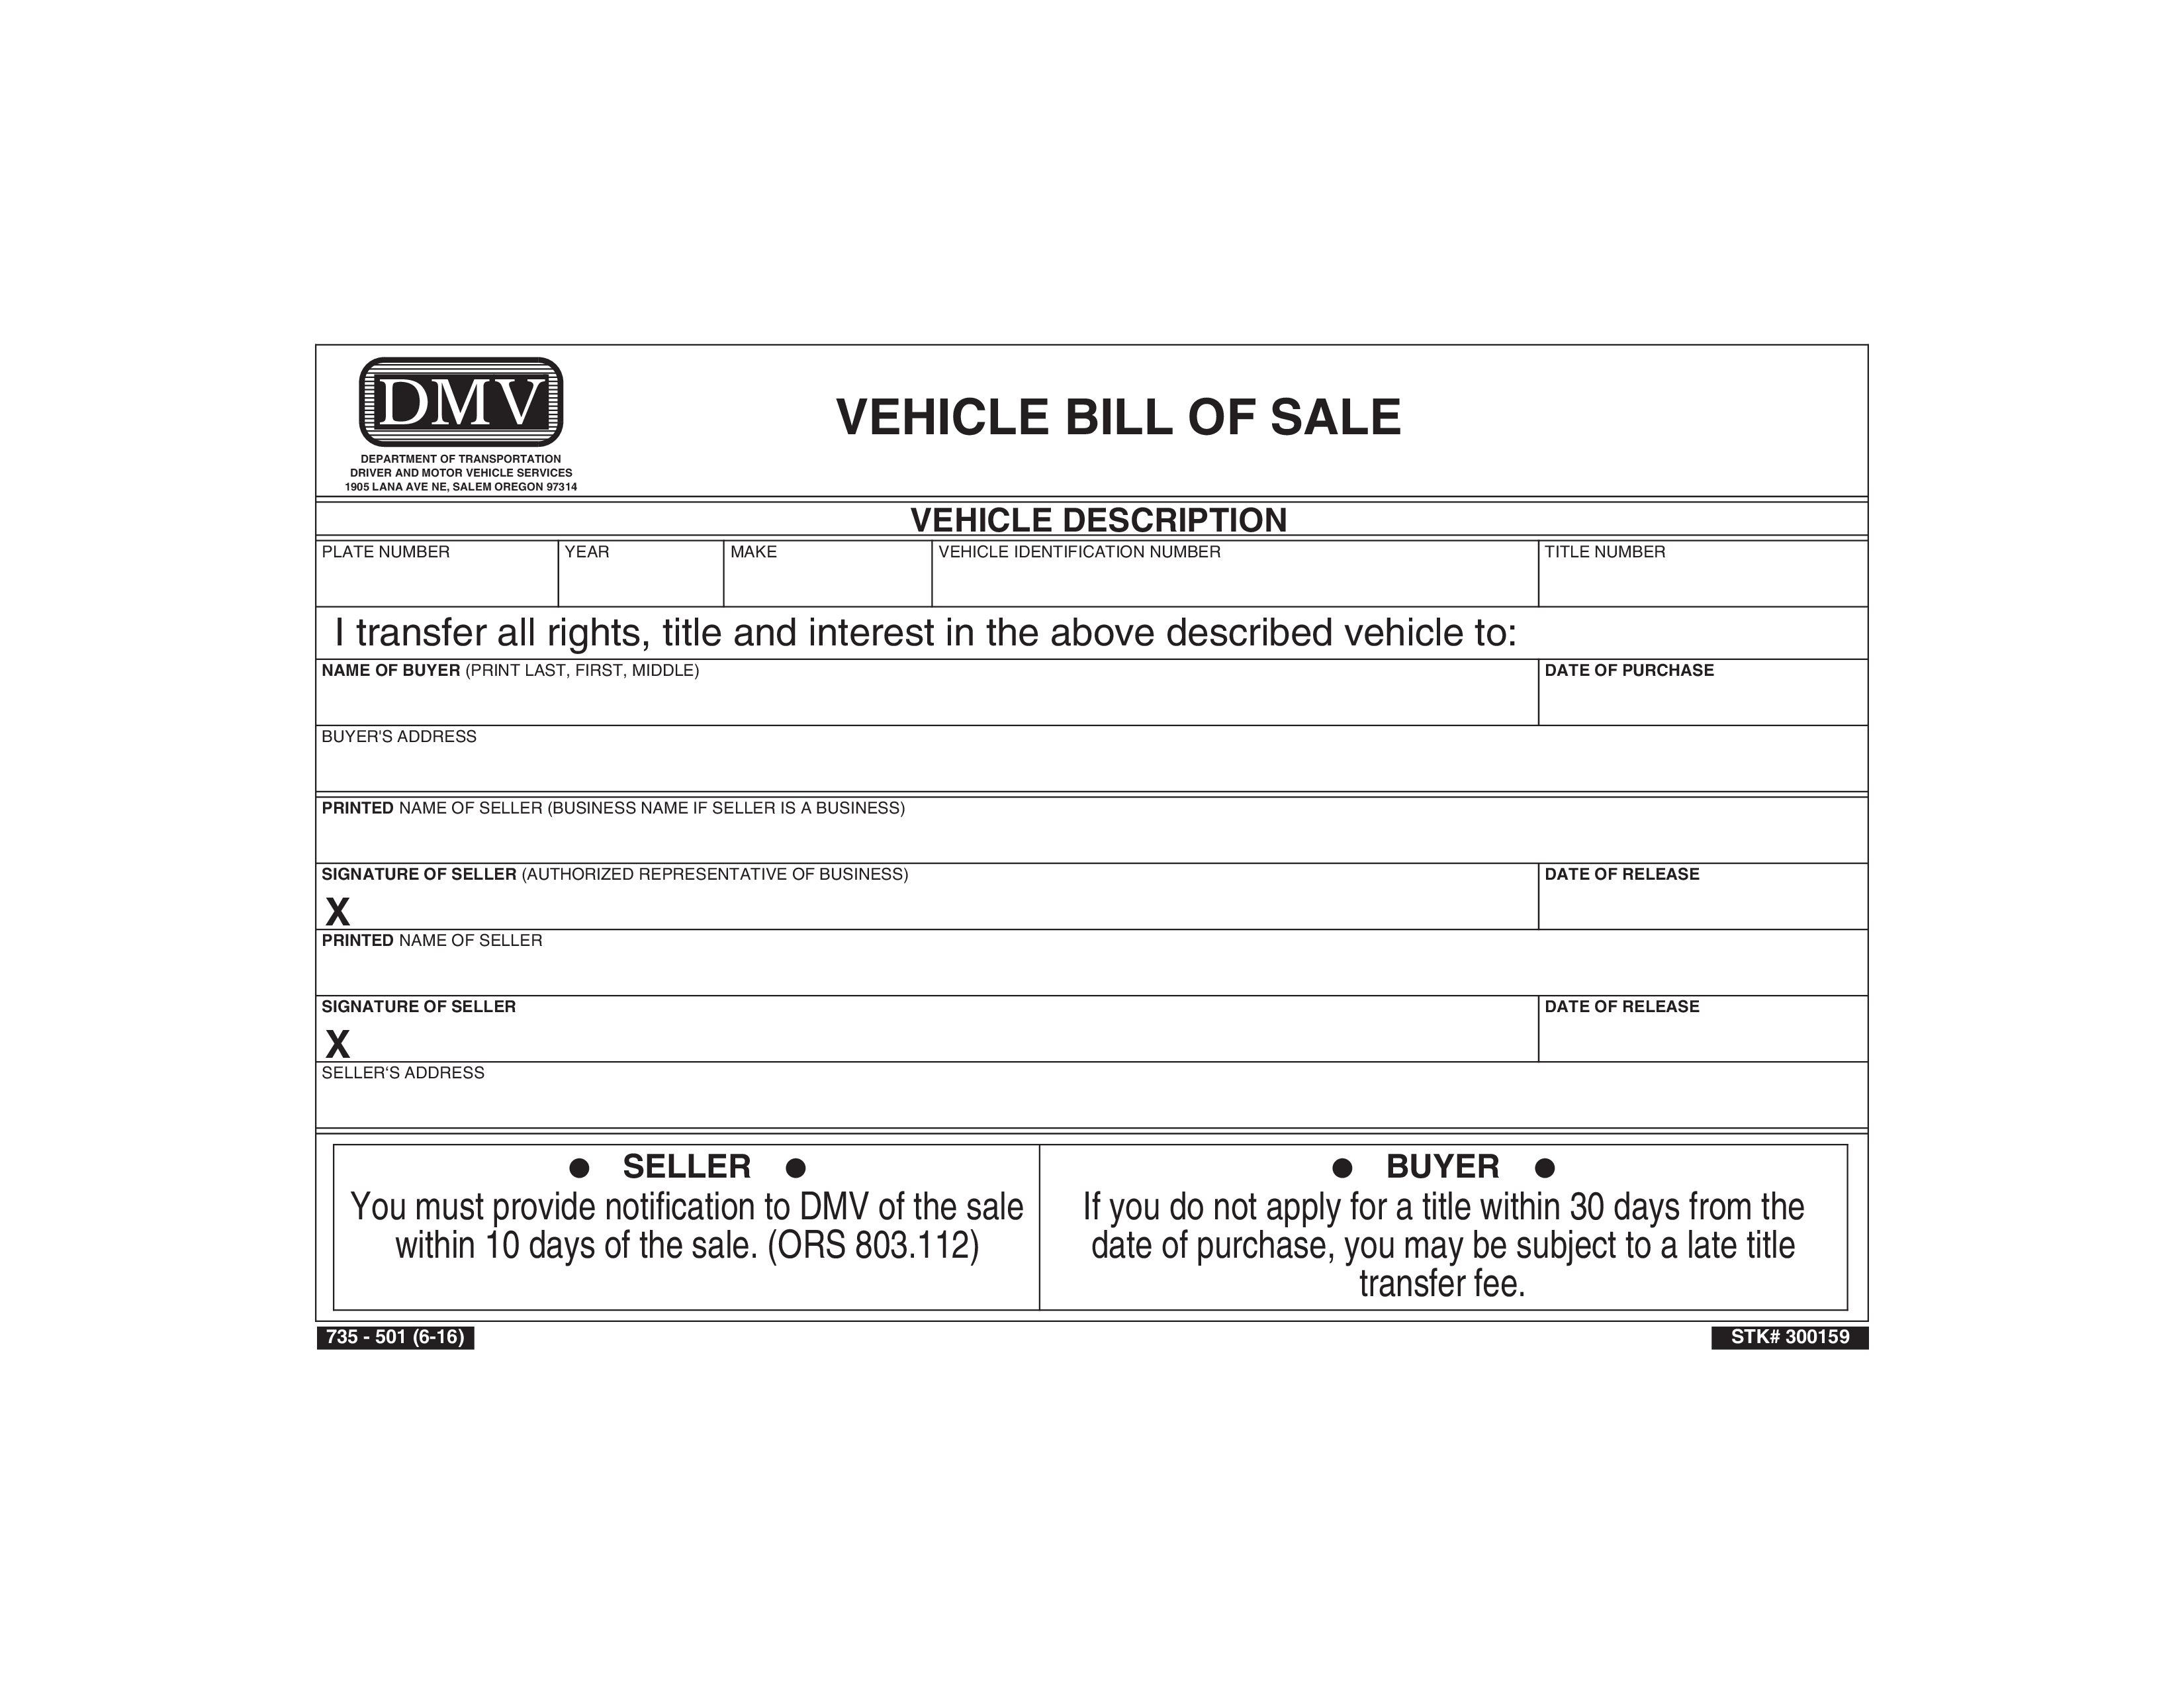 used vehicle bill of sale modèles